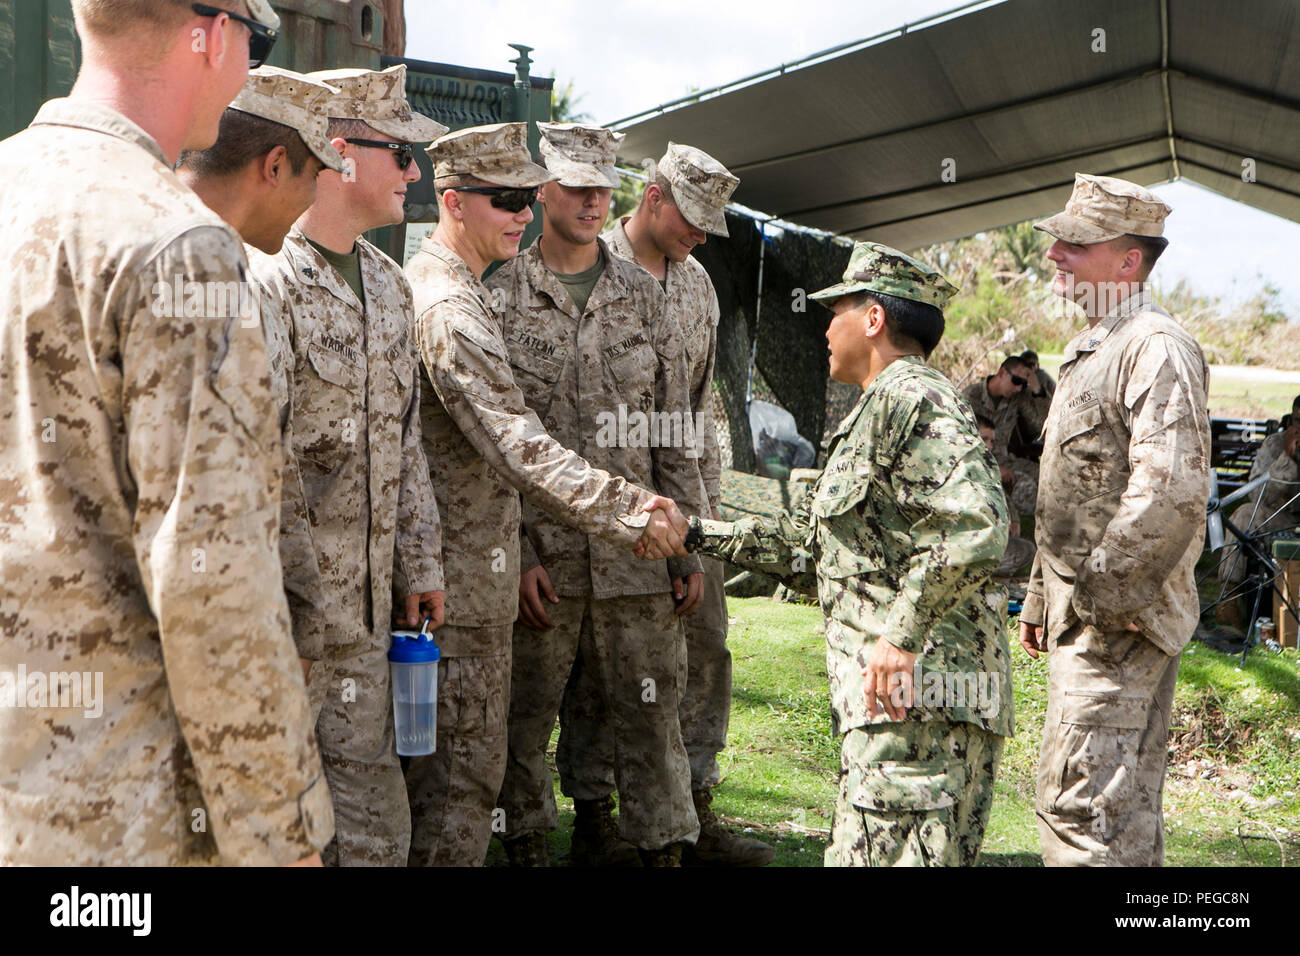 U.S. Navy Rear Adm. Bette Bolivar, the commander of U.S. Naval Forces Marianas, speaks with U.S. Marines from Combat Logistics Battalion 31, 31st Marine Expeditionary Unit, during a tour of a water purification site in Saipan, Aug. 11, 2015.  The Marines of CLB 31, 31st MEU, set up the site as part of typhoon relief efforts. The 31st MEU and the ships of the Bonhomme Richard Amphibious Ready Group are assisting the Federal Emergency Management Agency with distributing emergency relief supplies to Saipan after the island was struck by Typhoon Soudelor, Aug. 2-3. (U.S. Marine Corps photo by Lanc Stock Photo